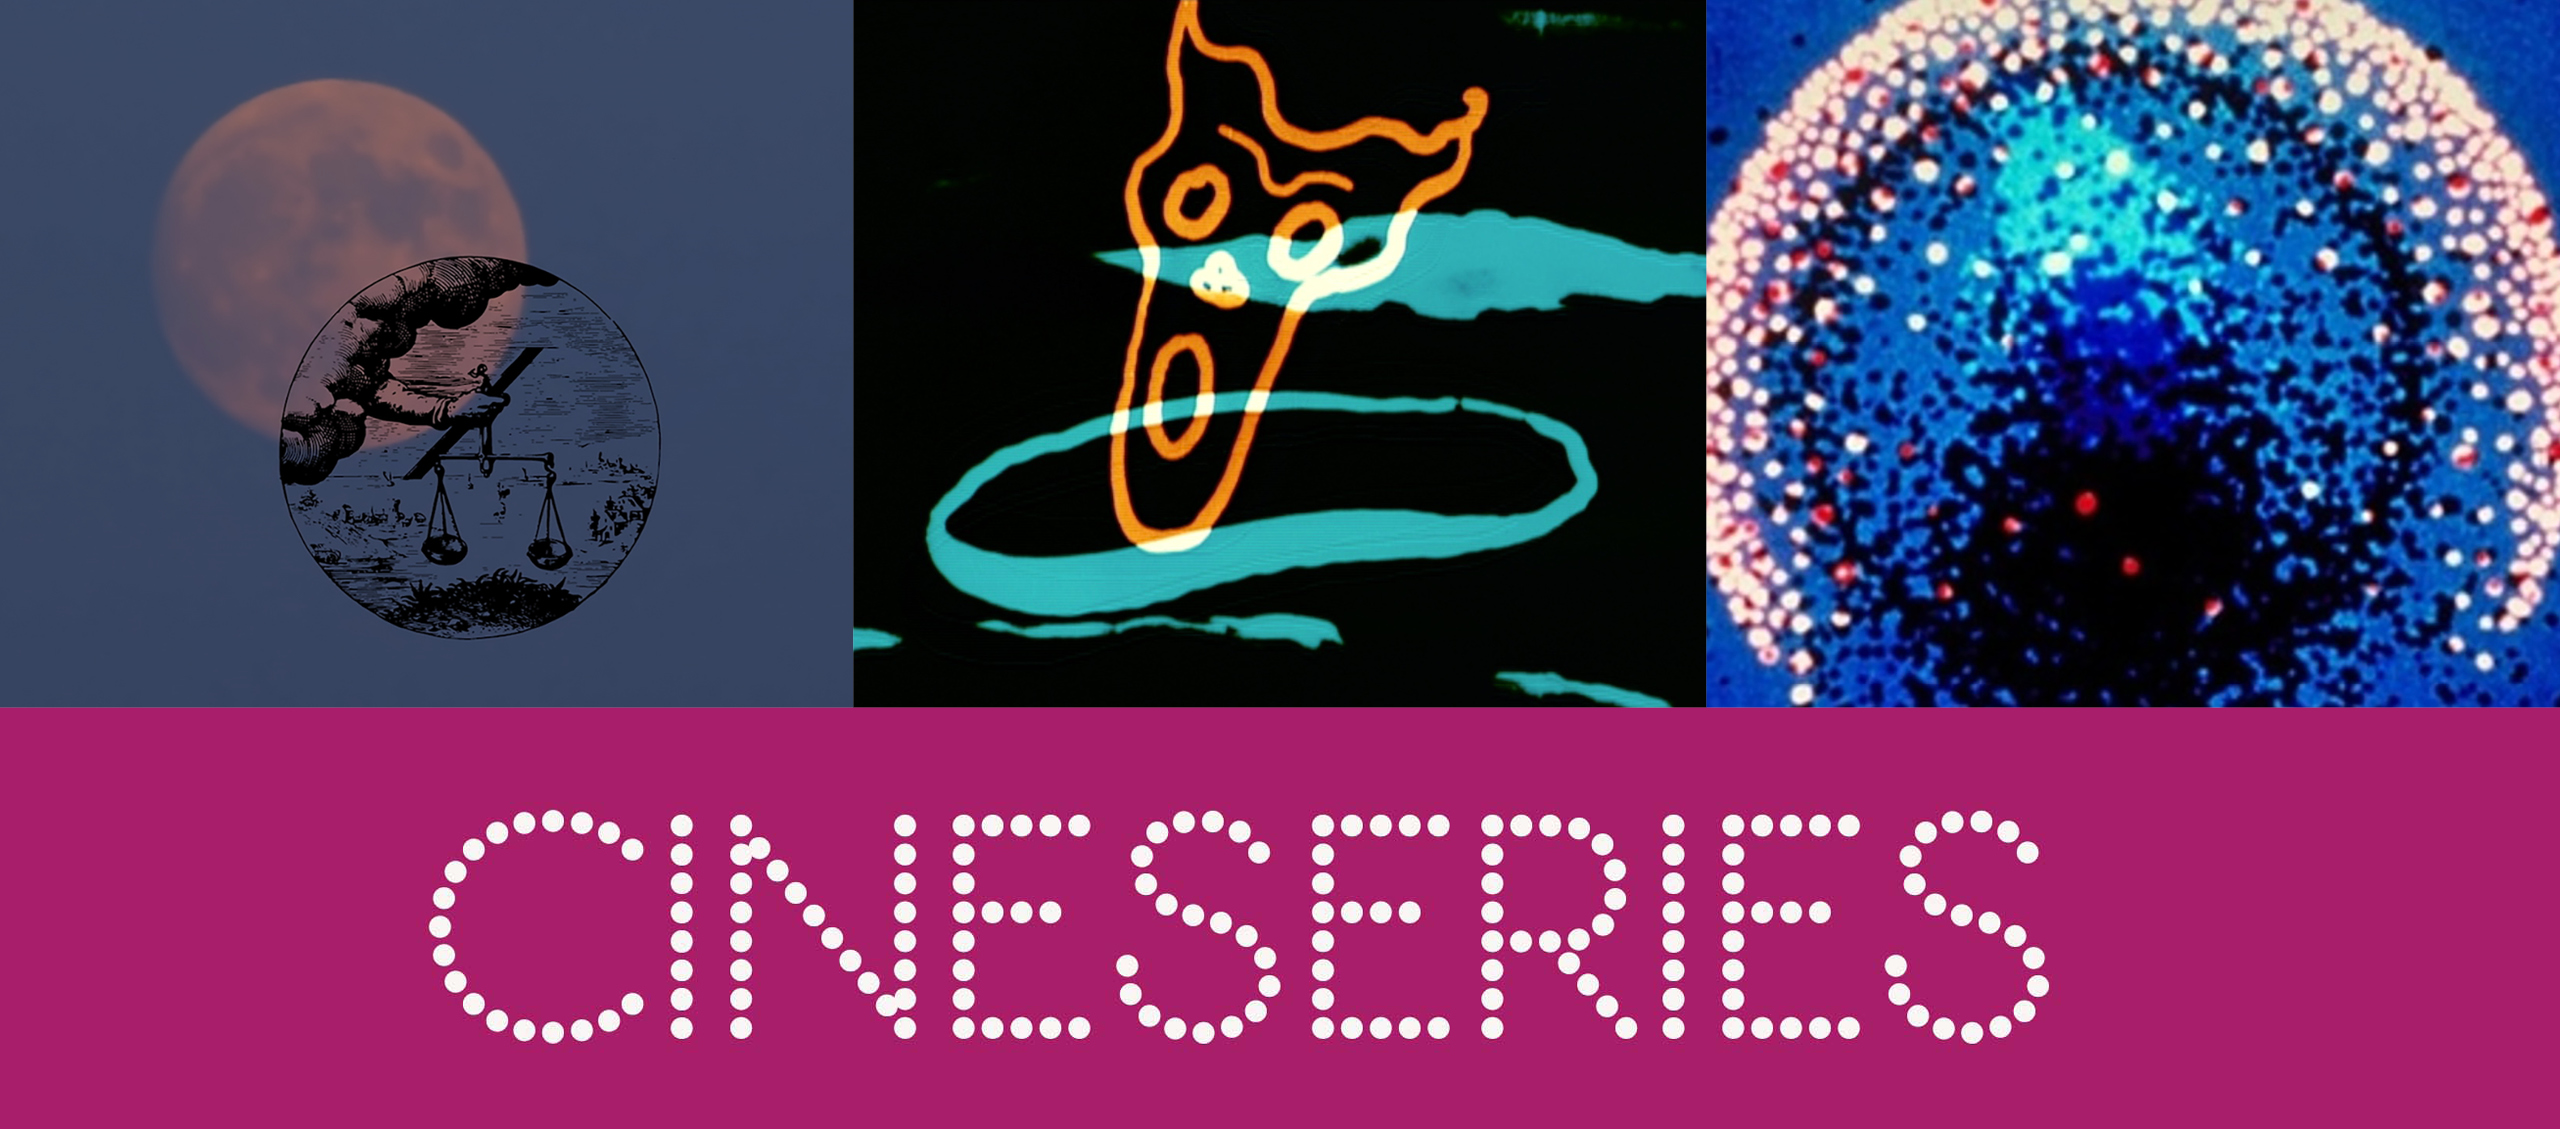 Three stills from the films in this program on a block of text that reads “CINESERIES” in white font made of circles against a pink background.